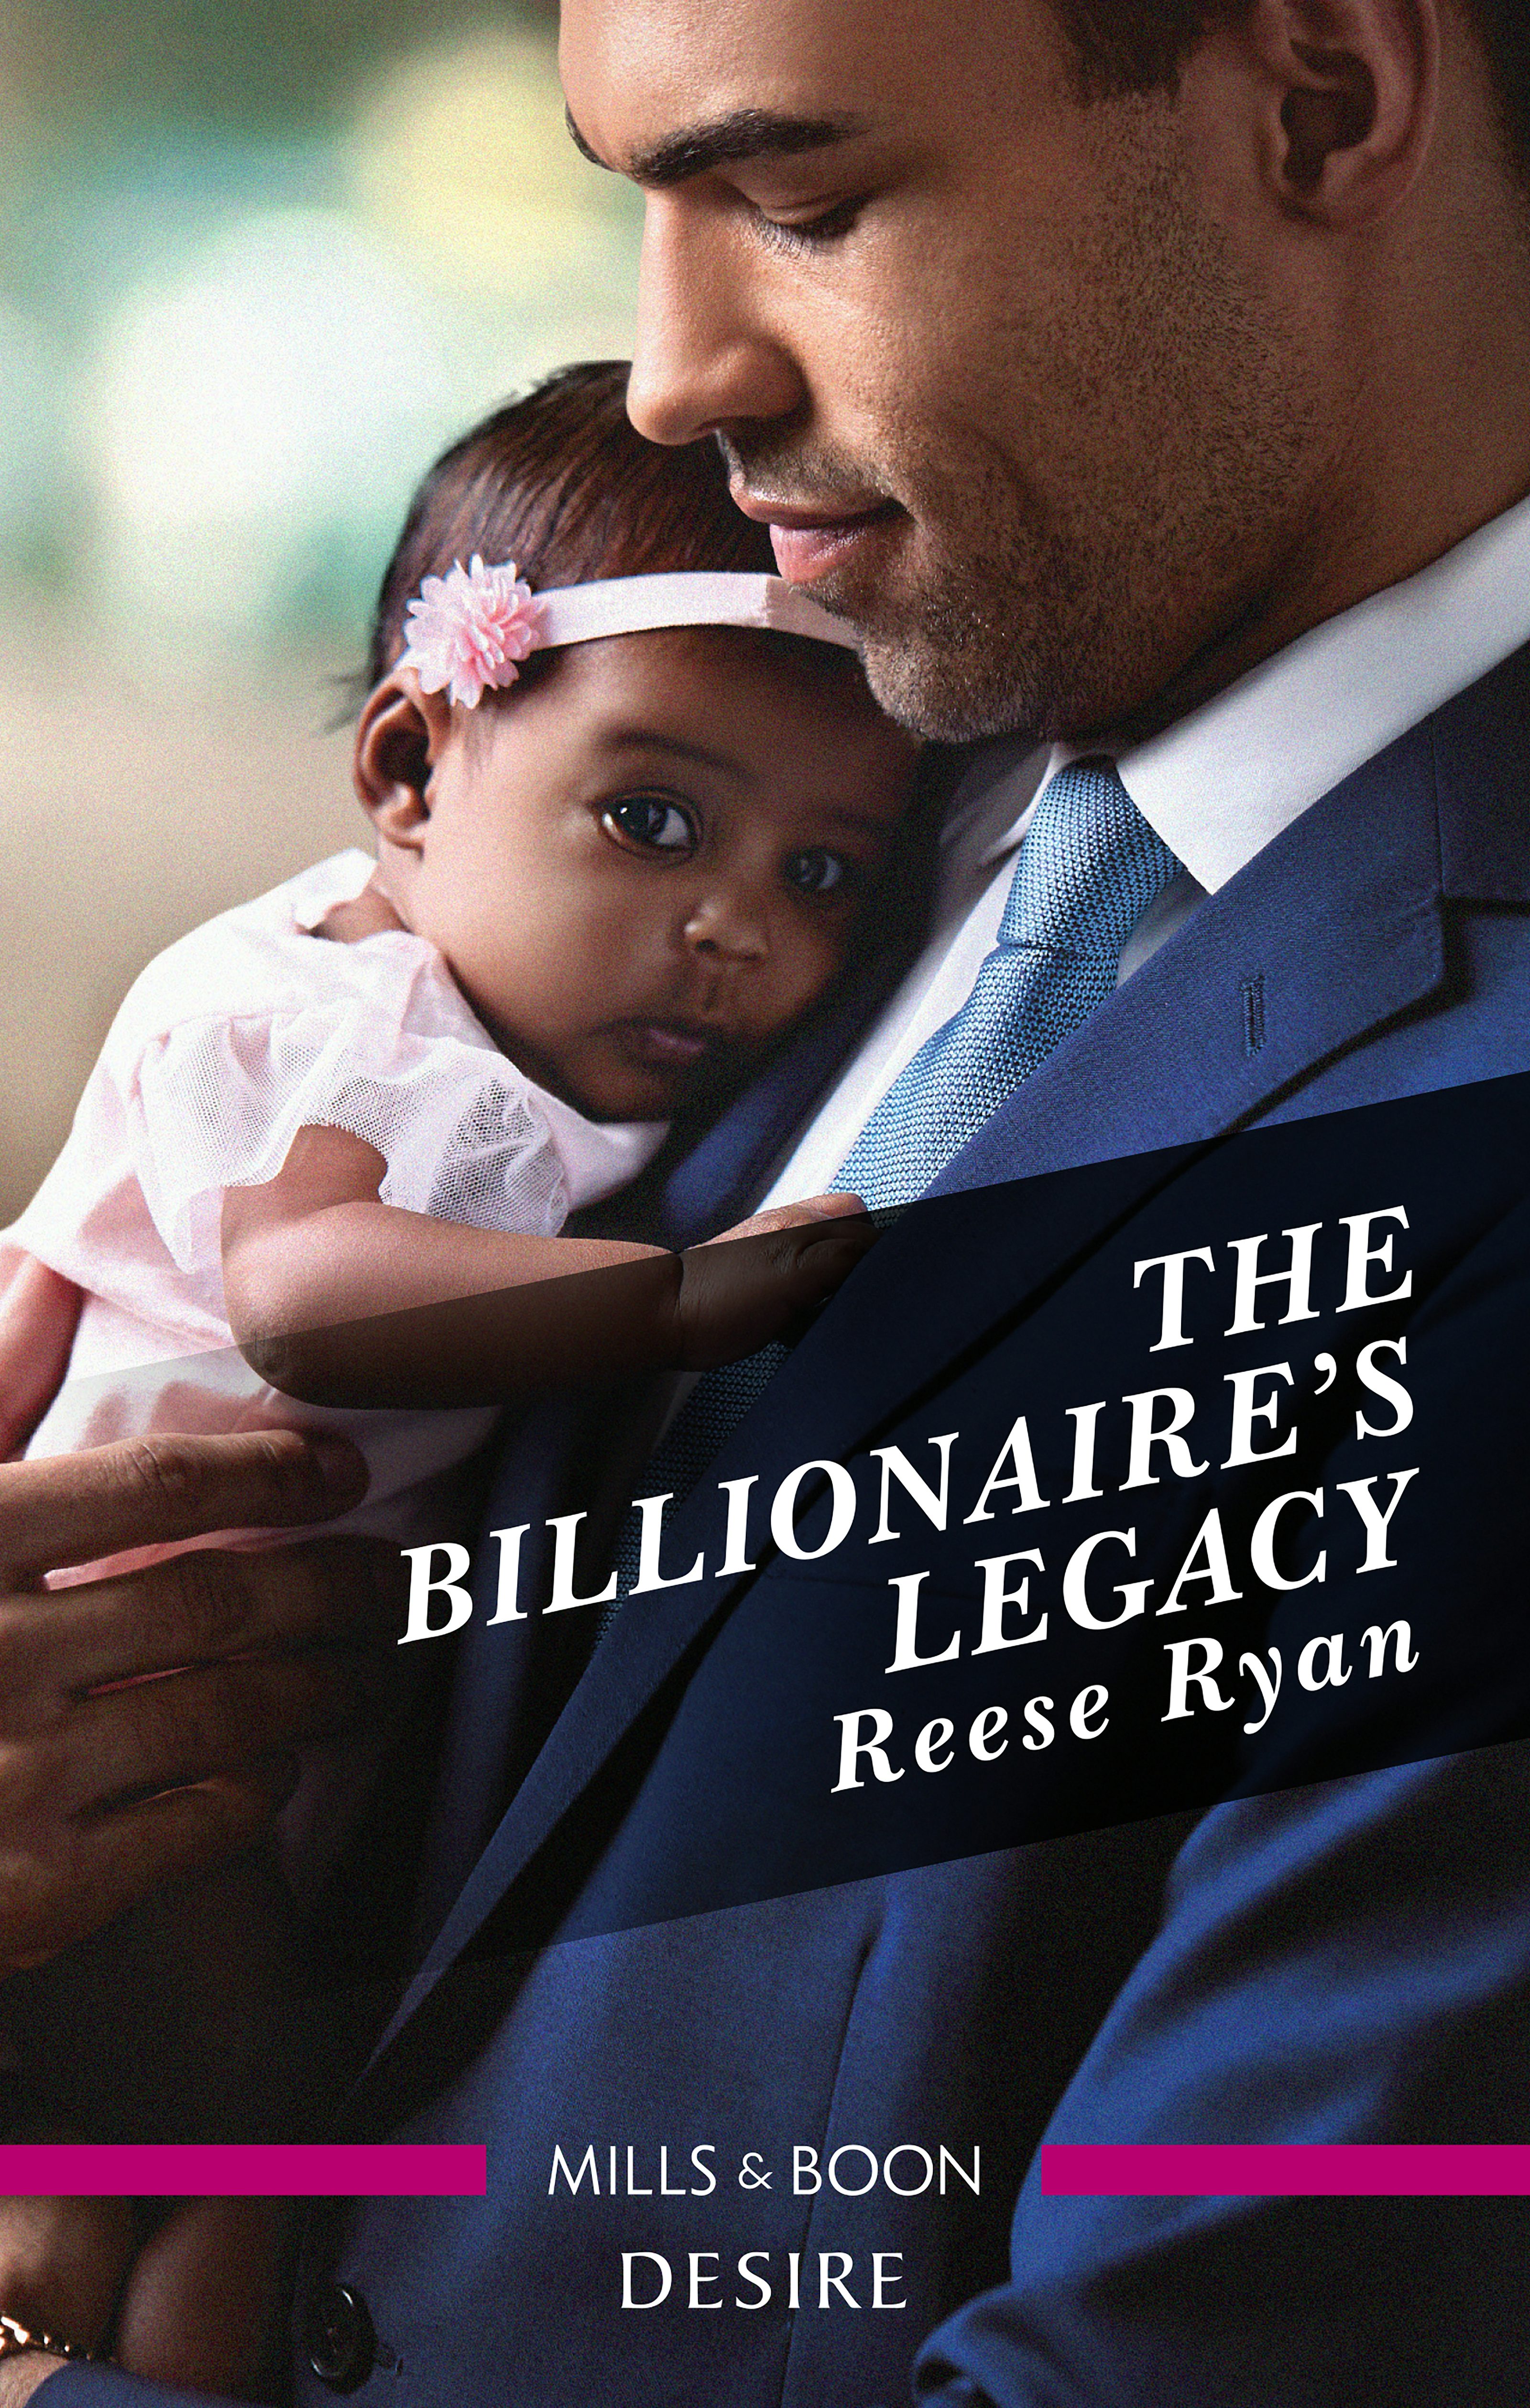 from　Boon　The　Ryan　publisher　–　Buy　Legacy　Billionaire's　Reese　by　direct　Mills　Australia